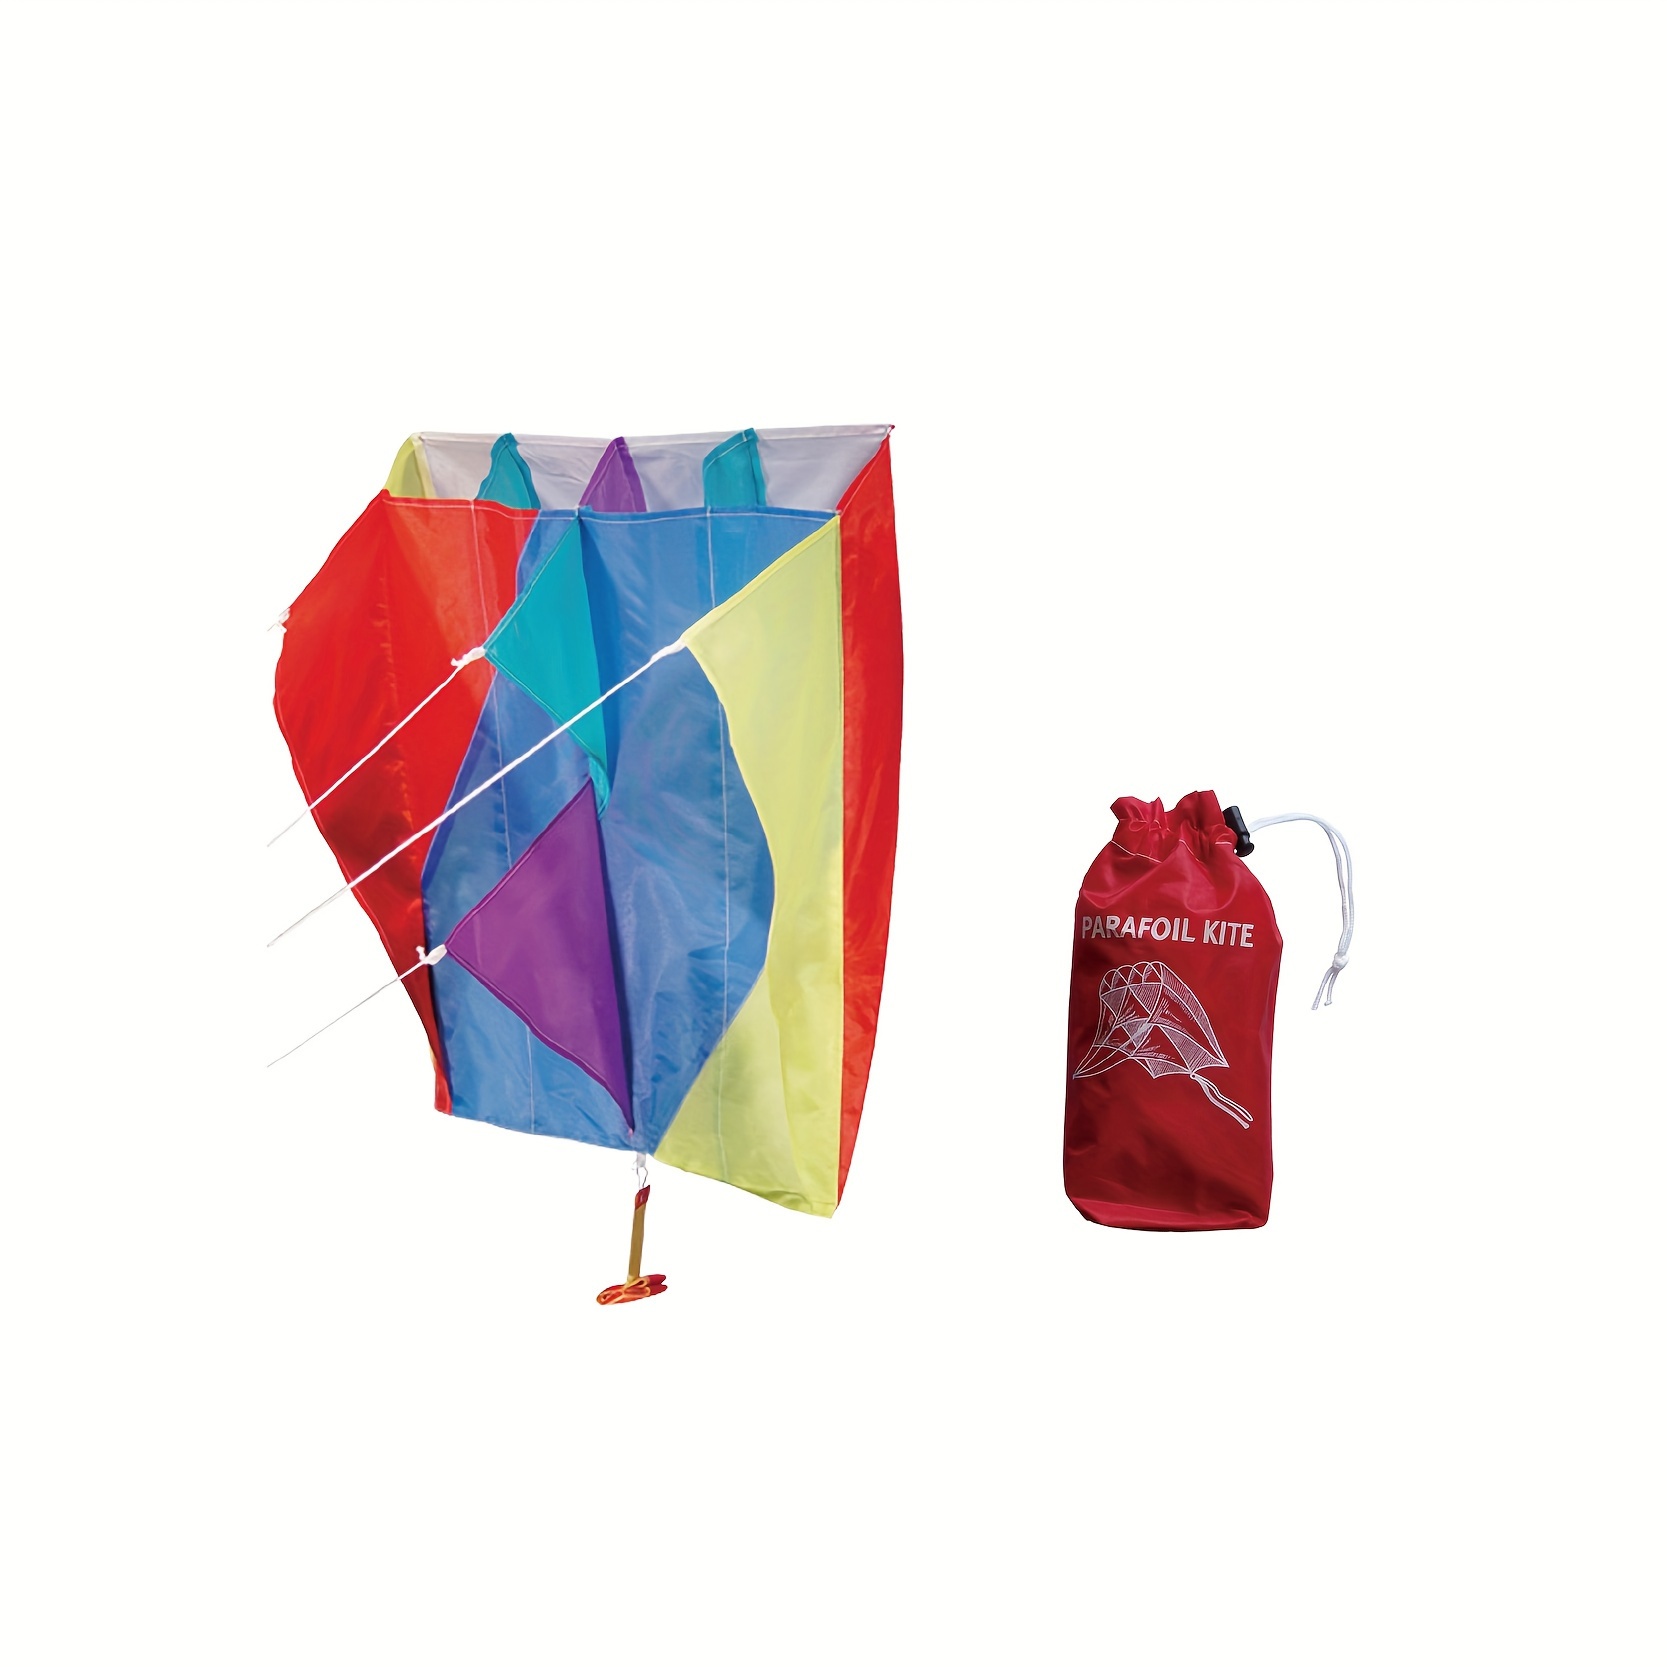 Mini Kite With Swallow Design, Wings Moveable, Suitable For